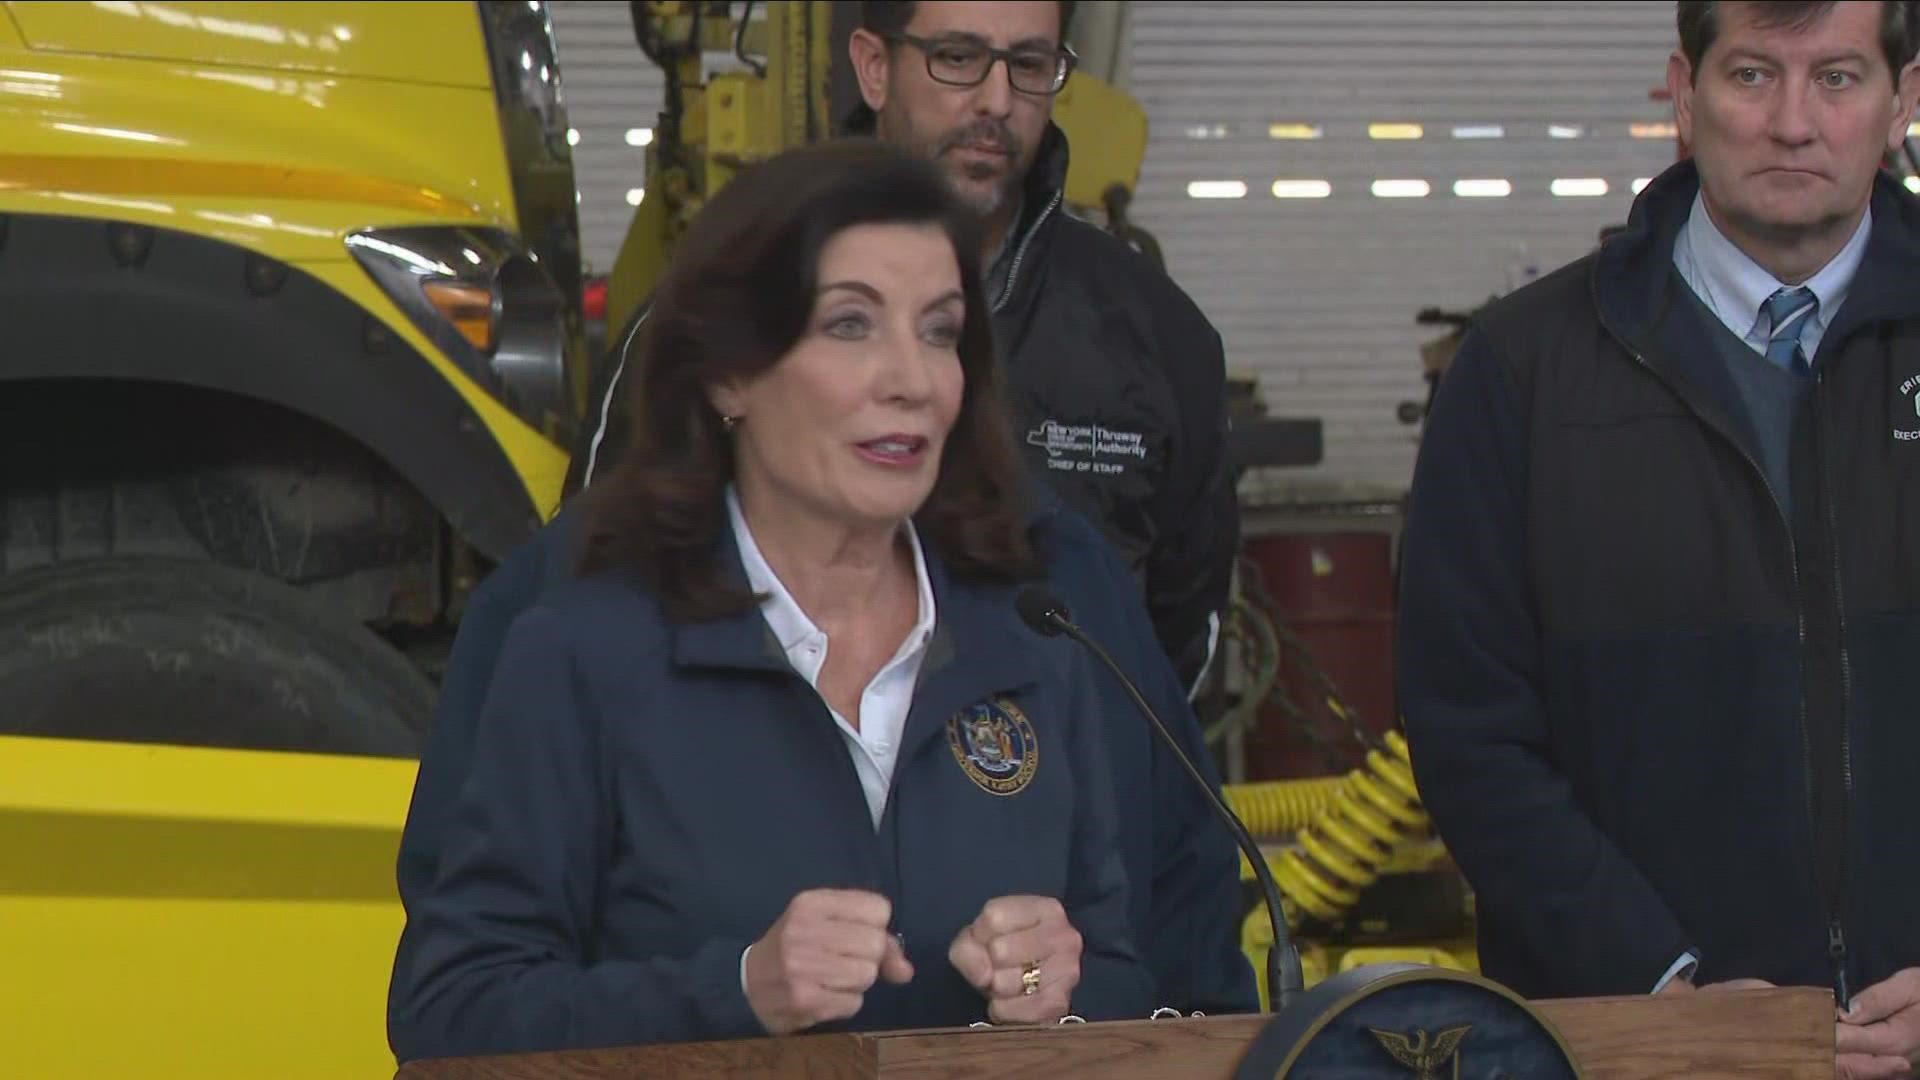 GOVERNOR KATHY HOCHUL ISSUED A STATE OF EMERGENCY AHEAD OF THE SNOW.